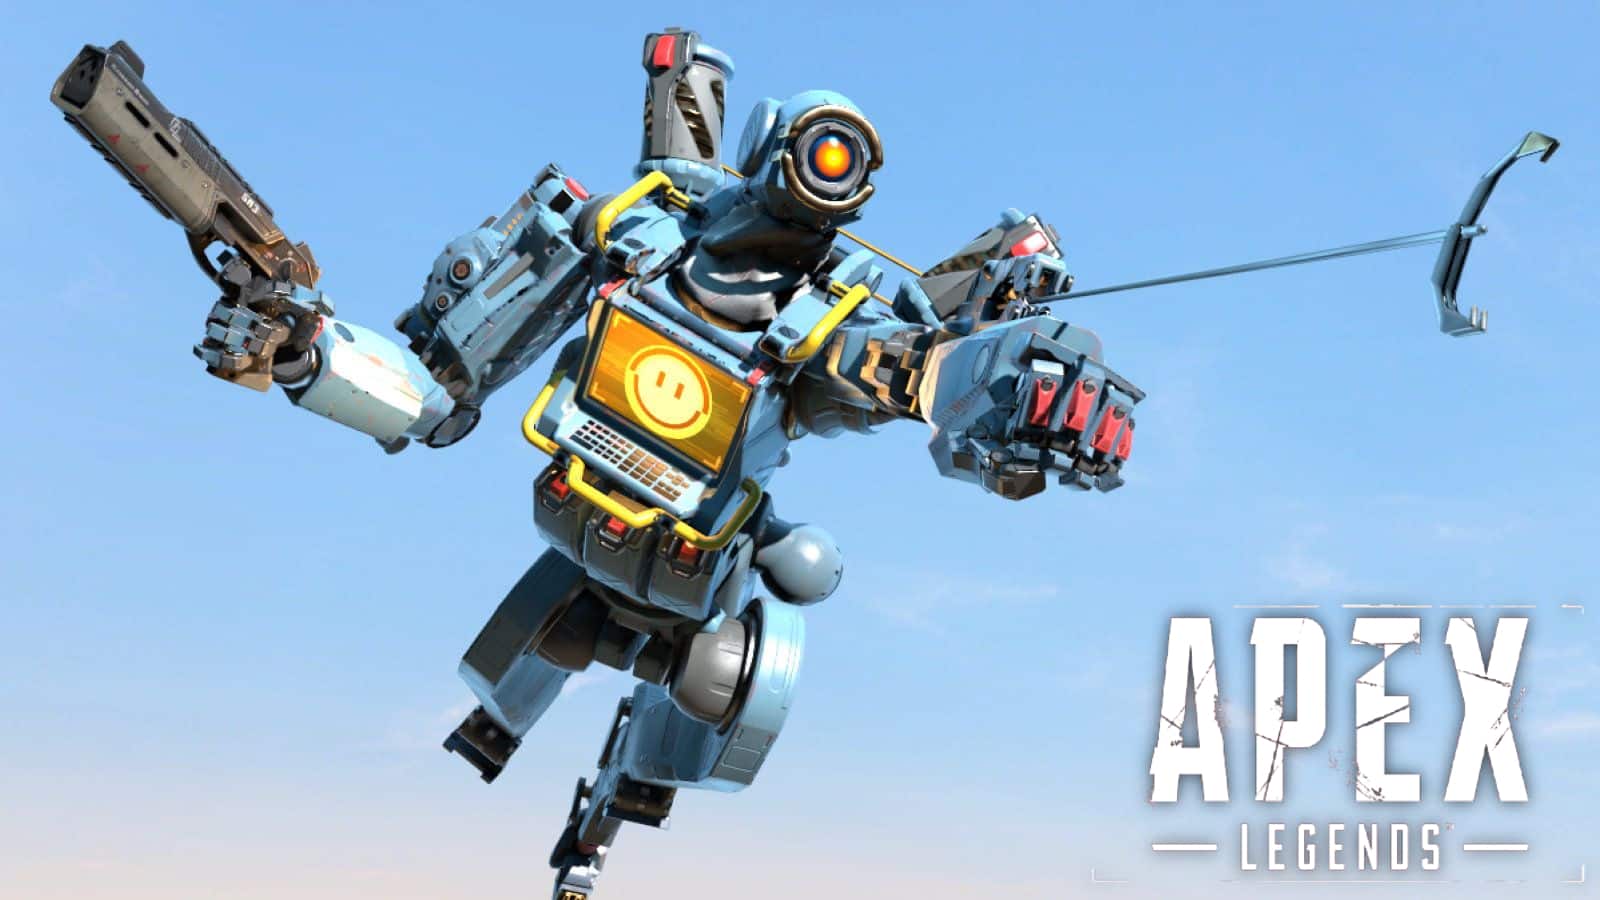 Crazy Apex Legends Pathfinder glitch takes super jumping to new heights